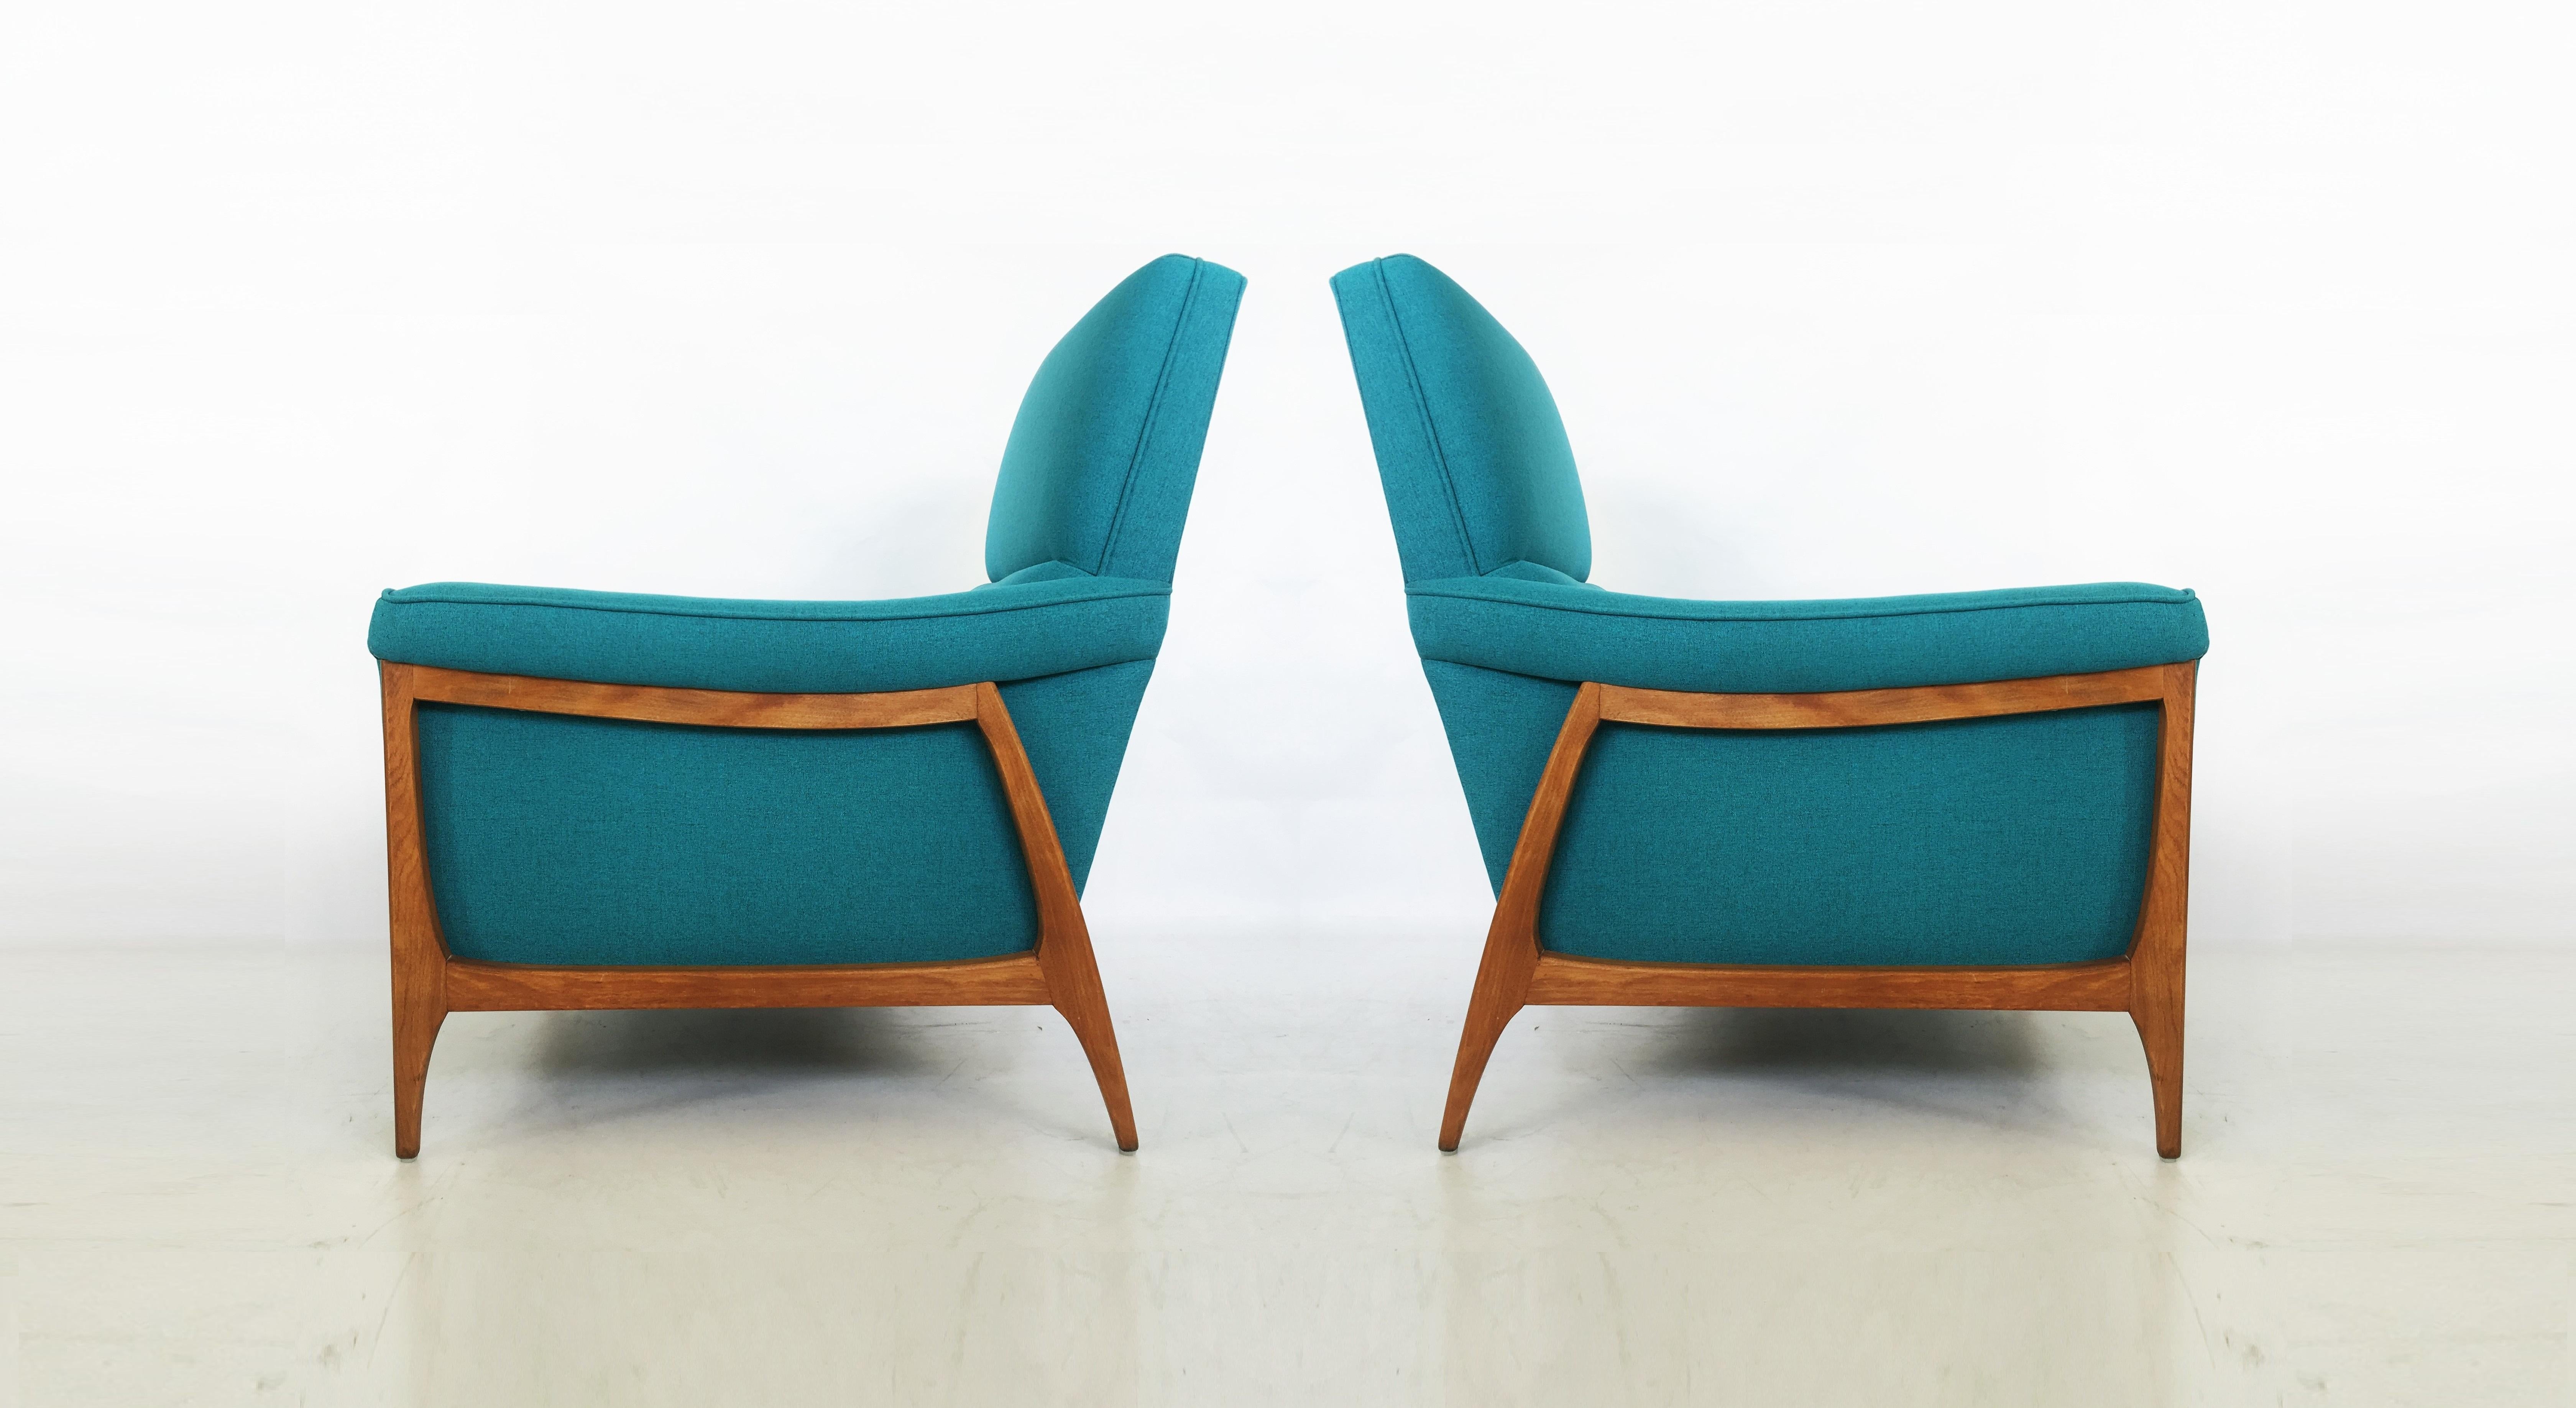 Pair of iconic lounge chairs from the 